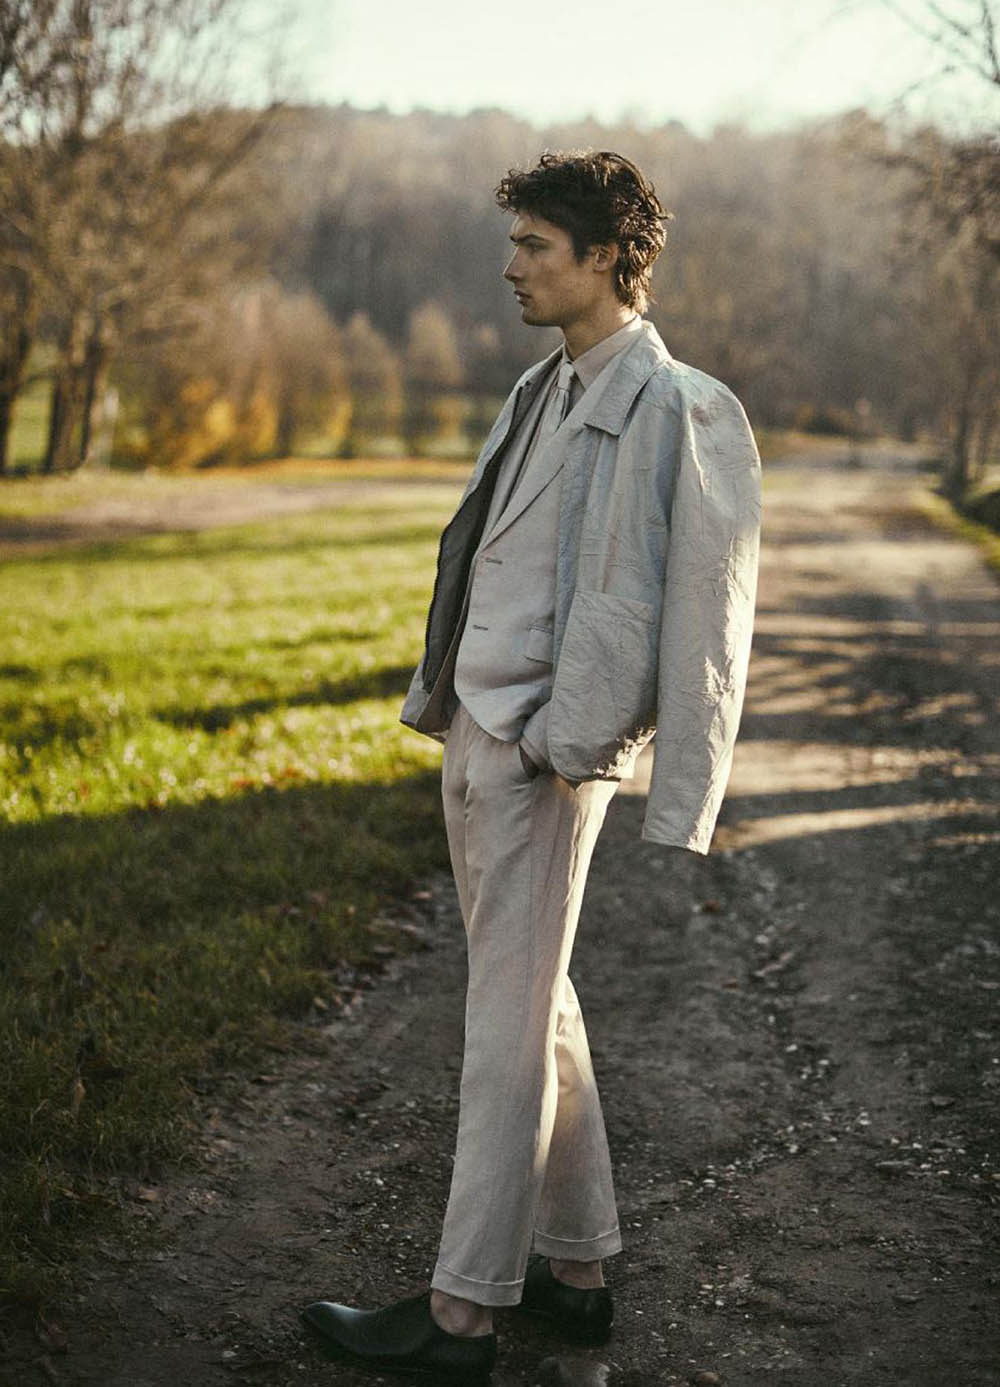 Laurens Pouchele by Stefano Galuzzi for Icon Italia January 2020